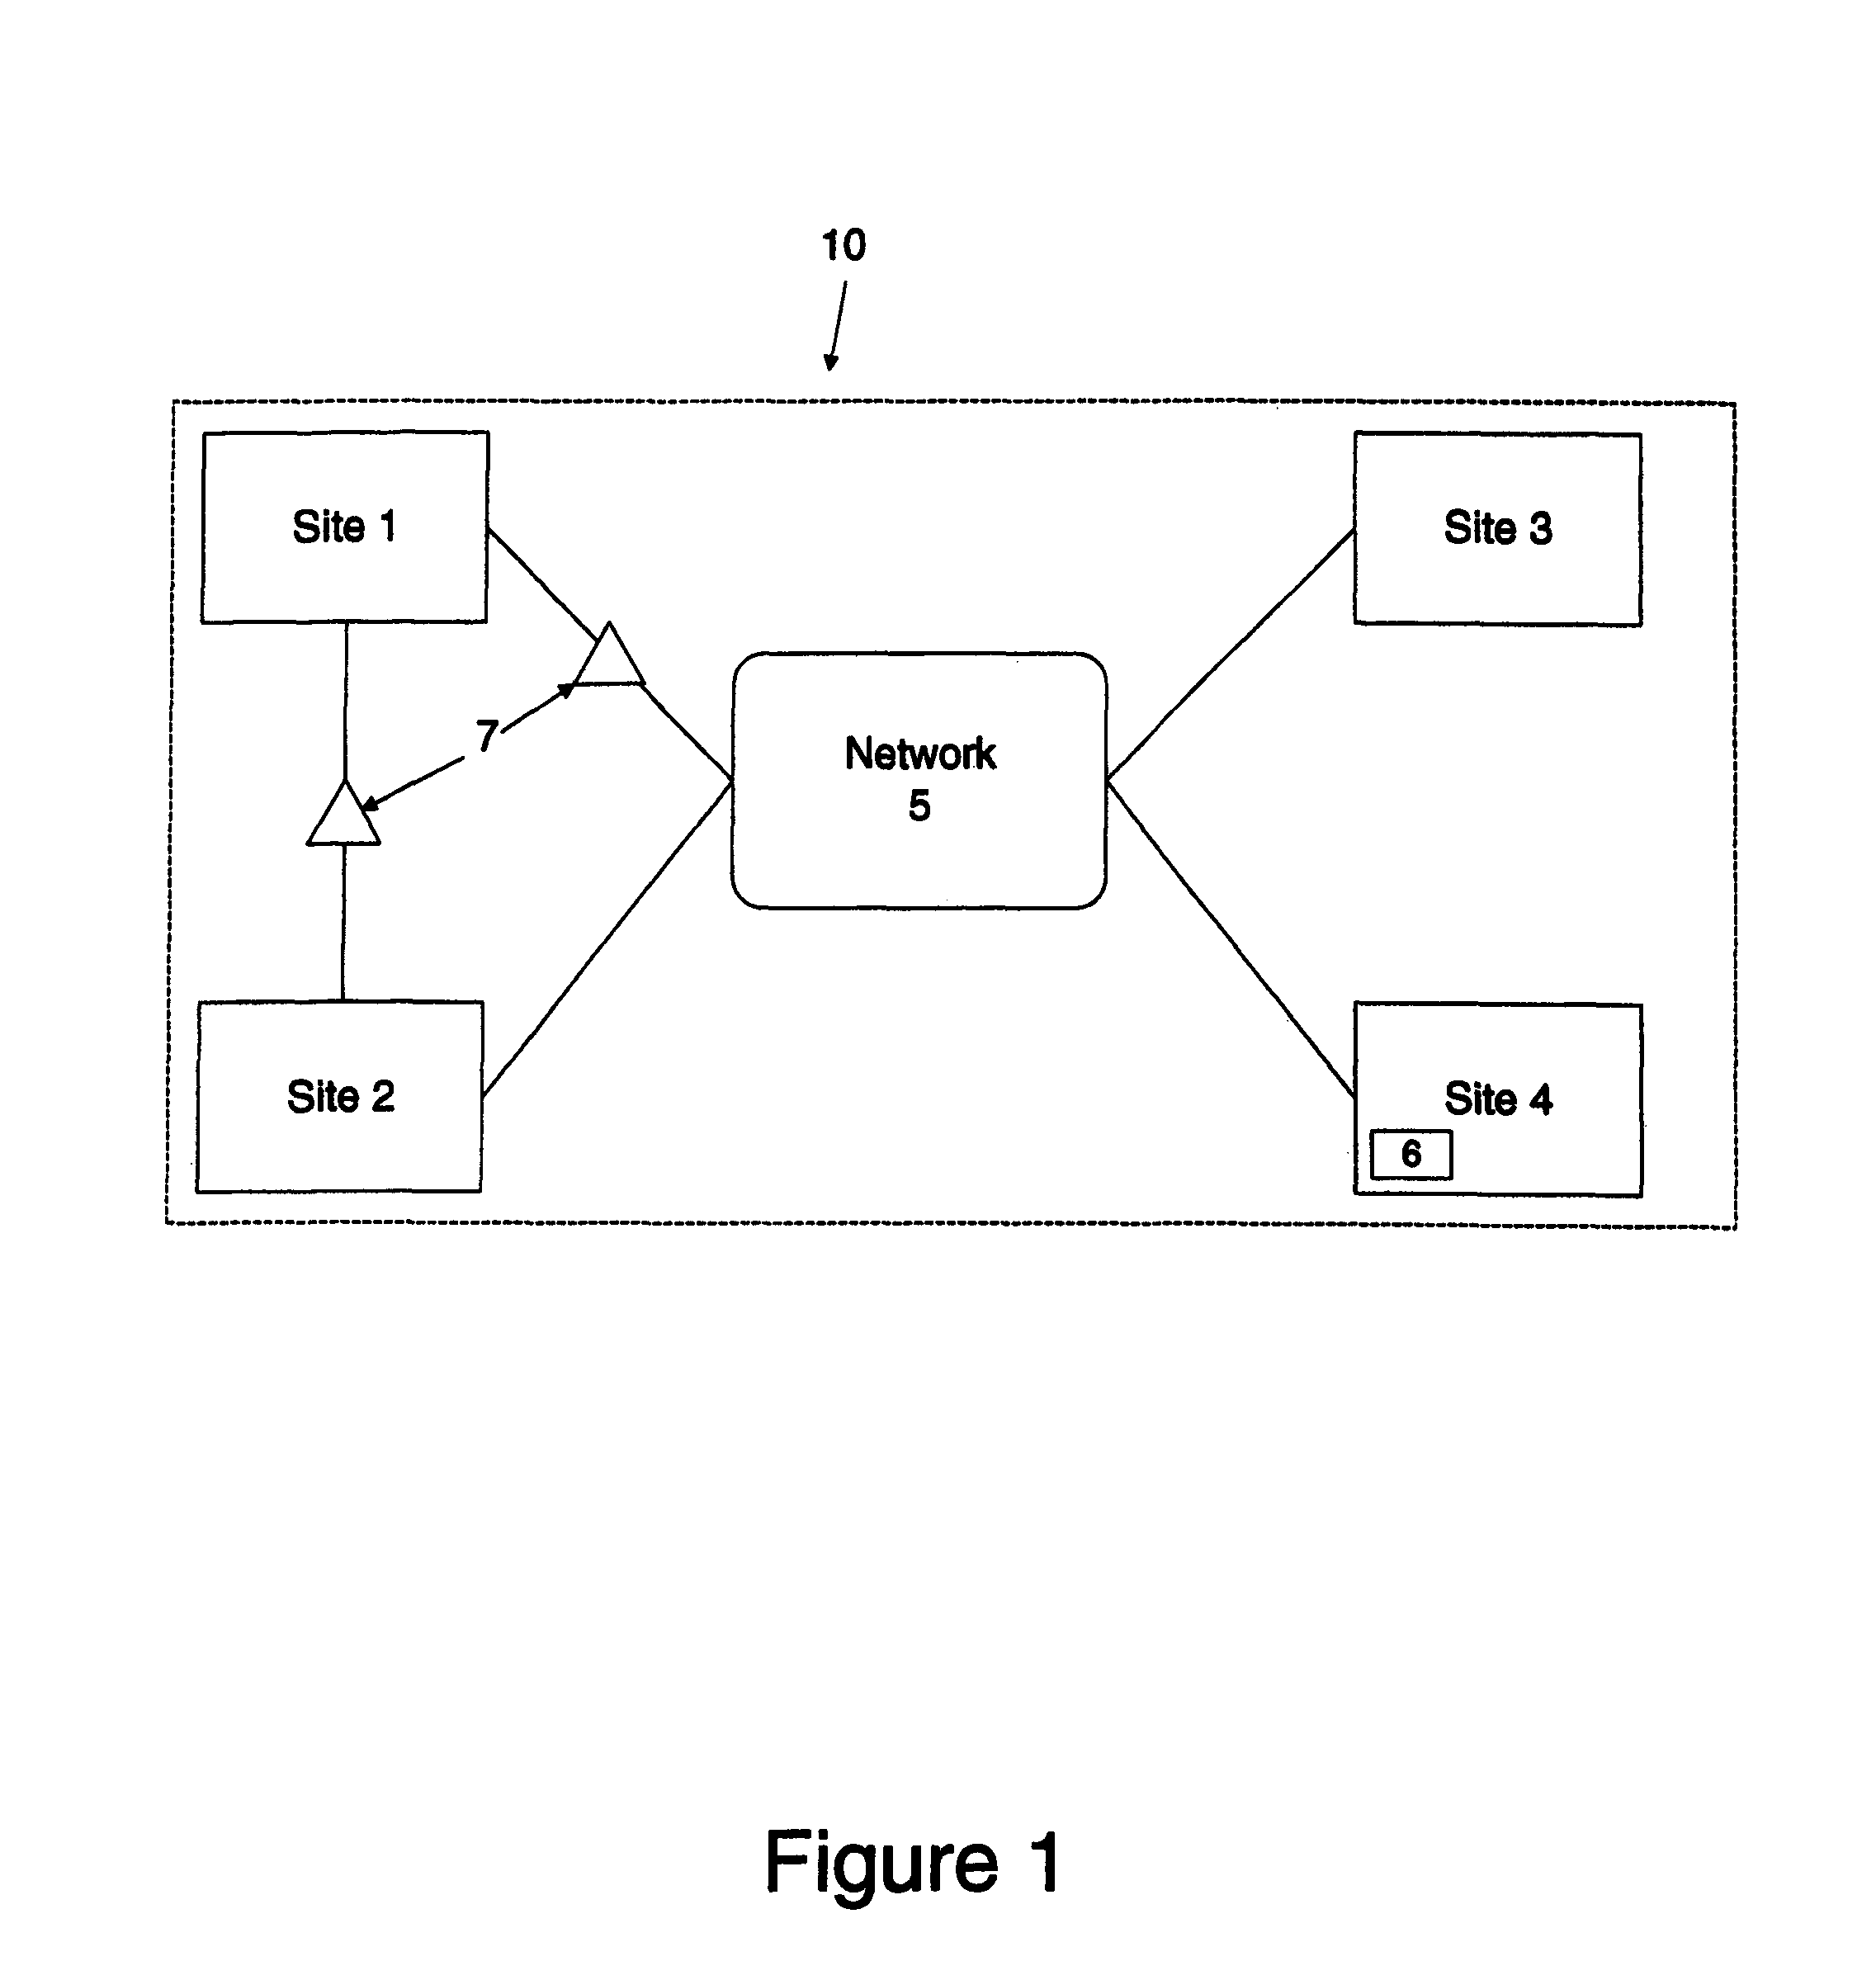 System and method for preventing identity theft or misuse by restricting access